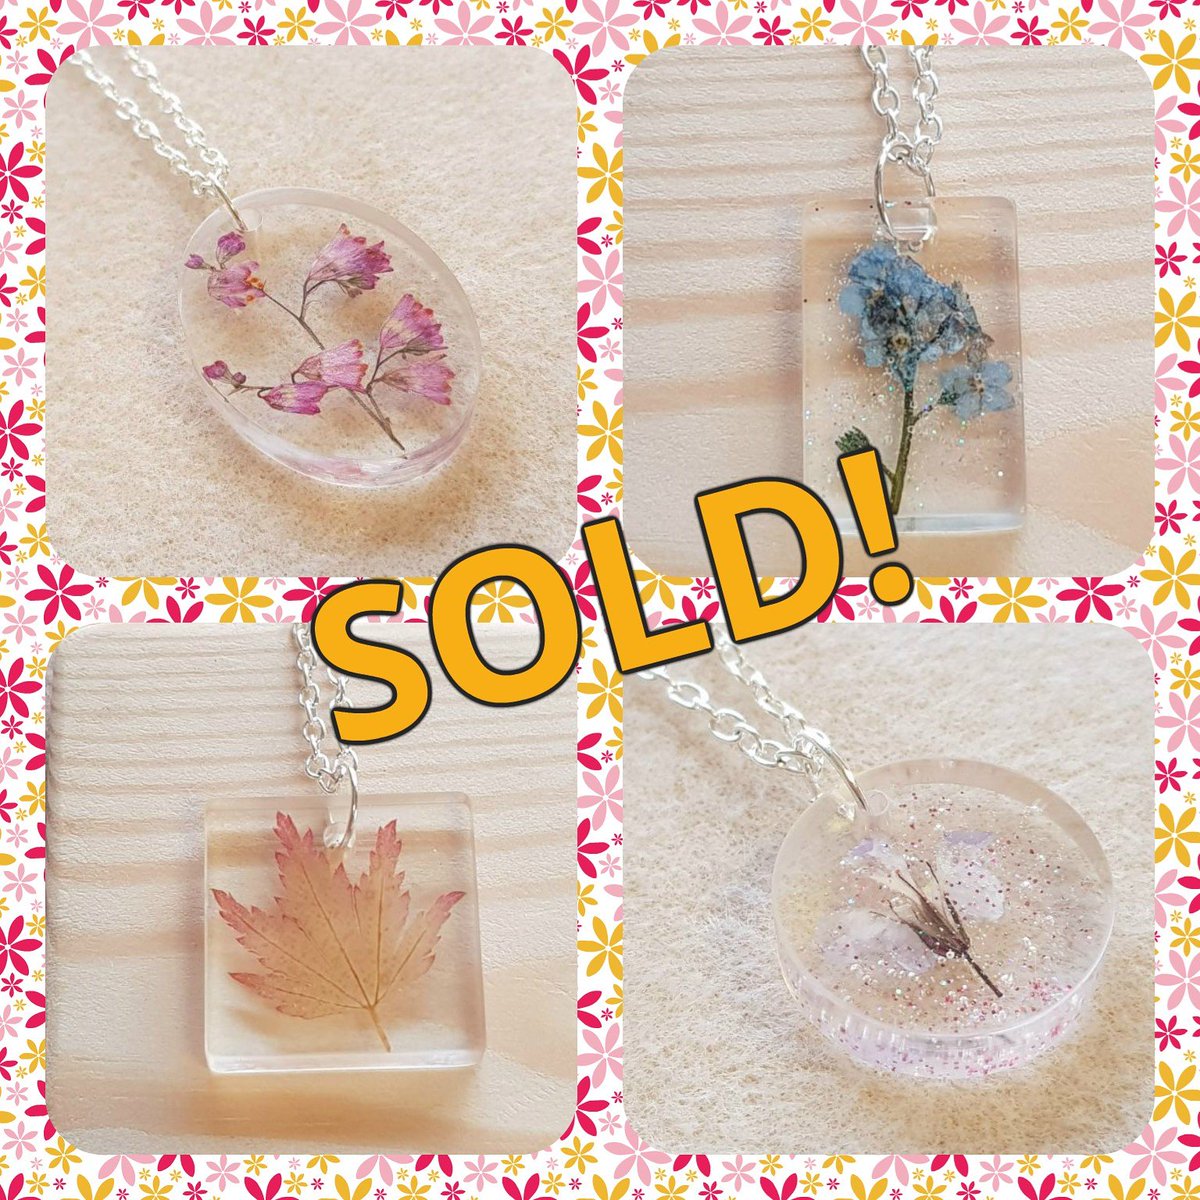 Resin pendants have been really popular so far in 2019! I'll be collecting new flowers for my next batch soon. All handmade in small batches with real flowers. Just £10 
#realflowers #readymadeitems #resinart #flowersofinstagram #leaves #leafjewelry #pretty #giftshop #giftideas